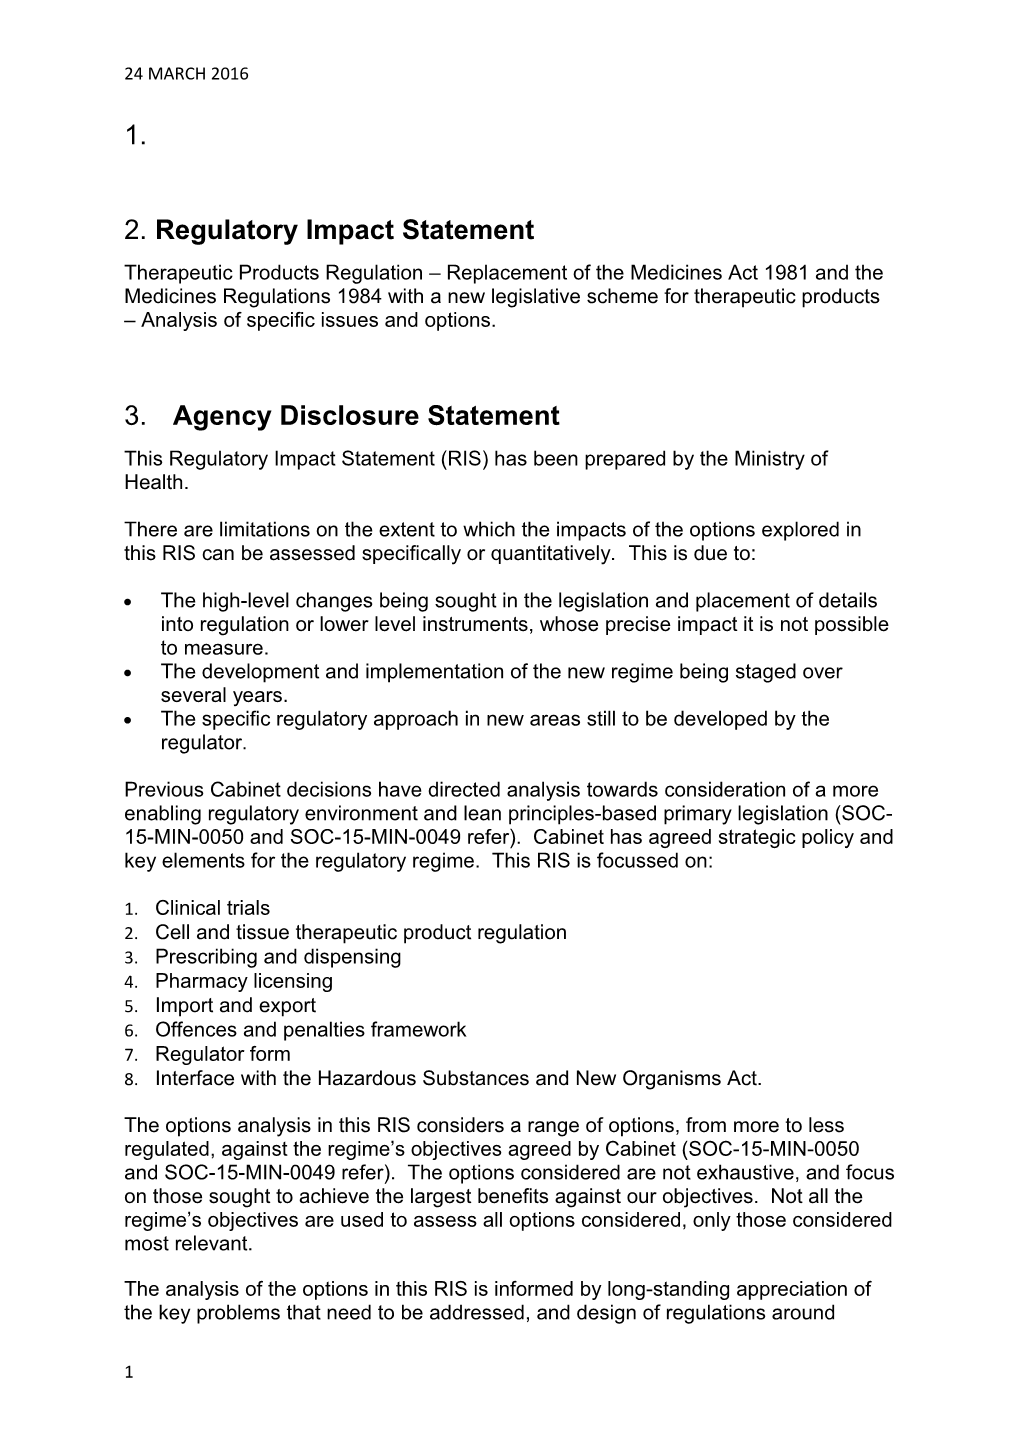 Regulatory Impact Statement: Therapeutic Products Regulation: Analysis of Specific Issues